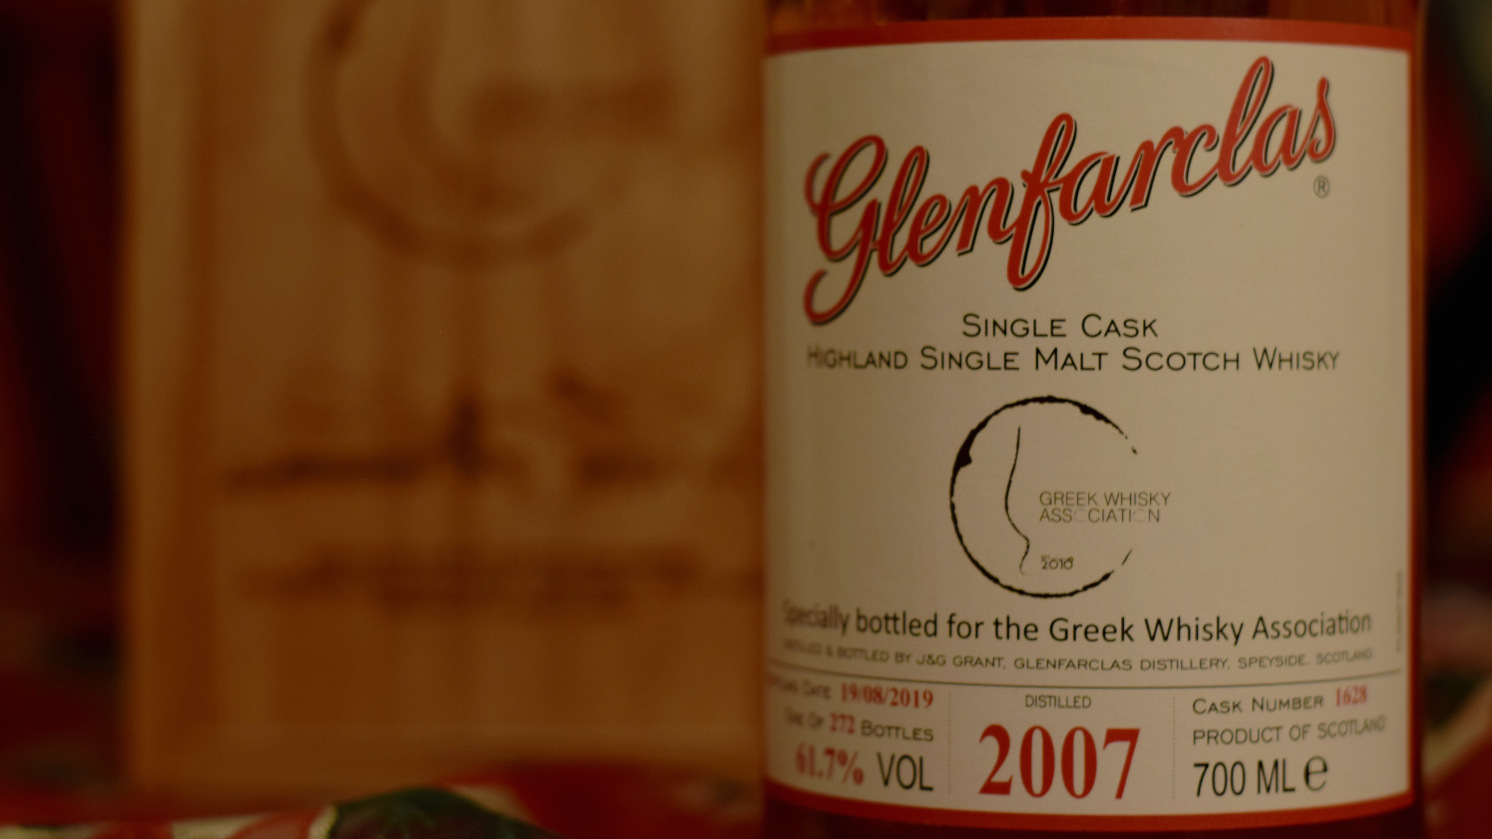 You are currently viewing Glenfarclas 2007 Single Cask (bottled for the G.W.A) | Review